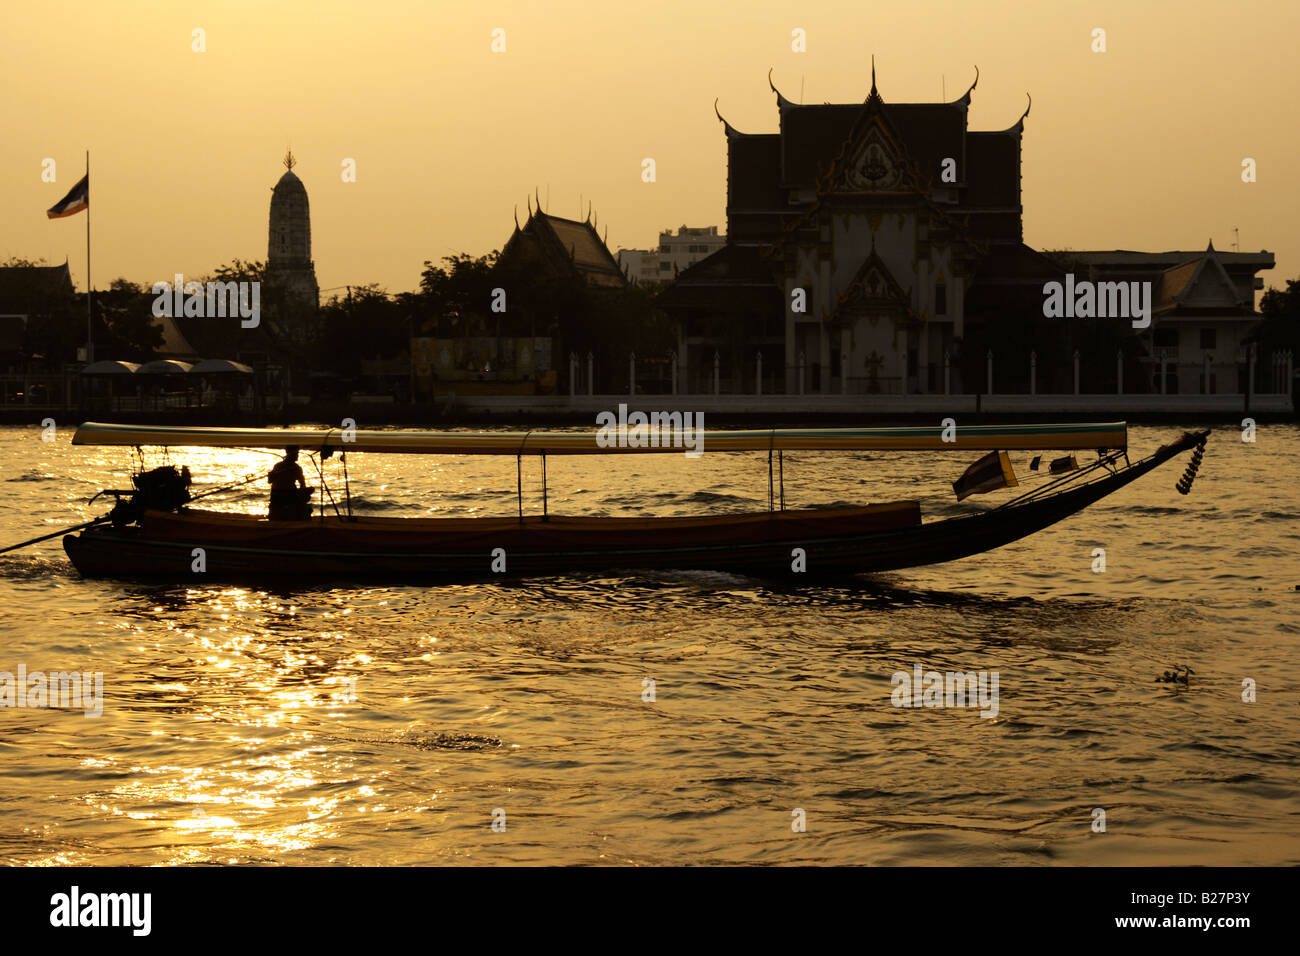 Longtail Boat on the Chao Phrya River Stock Photo